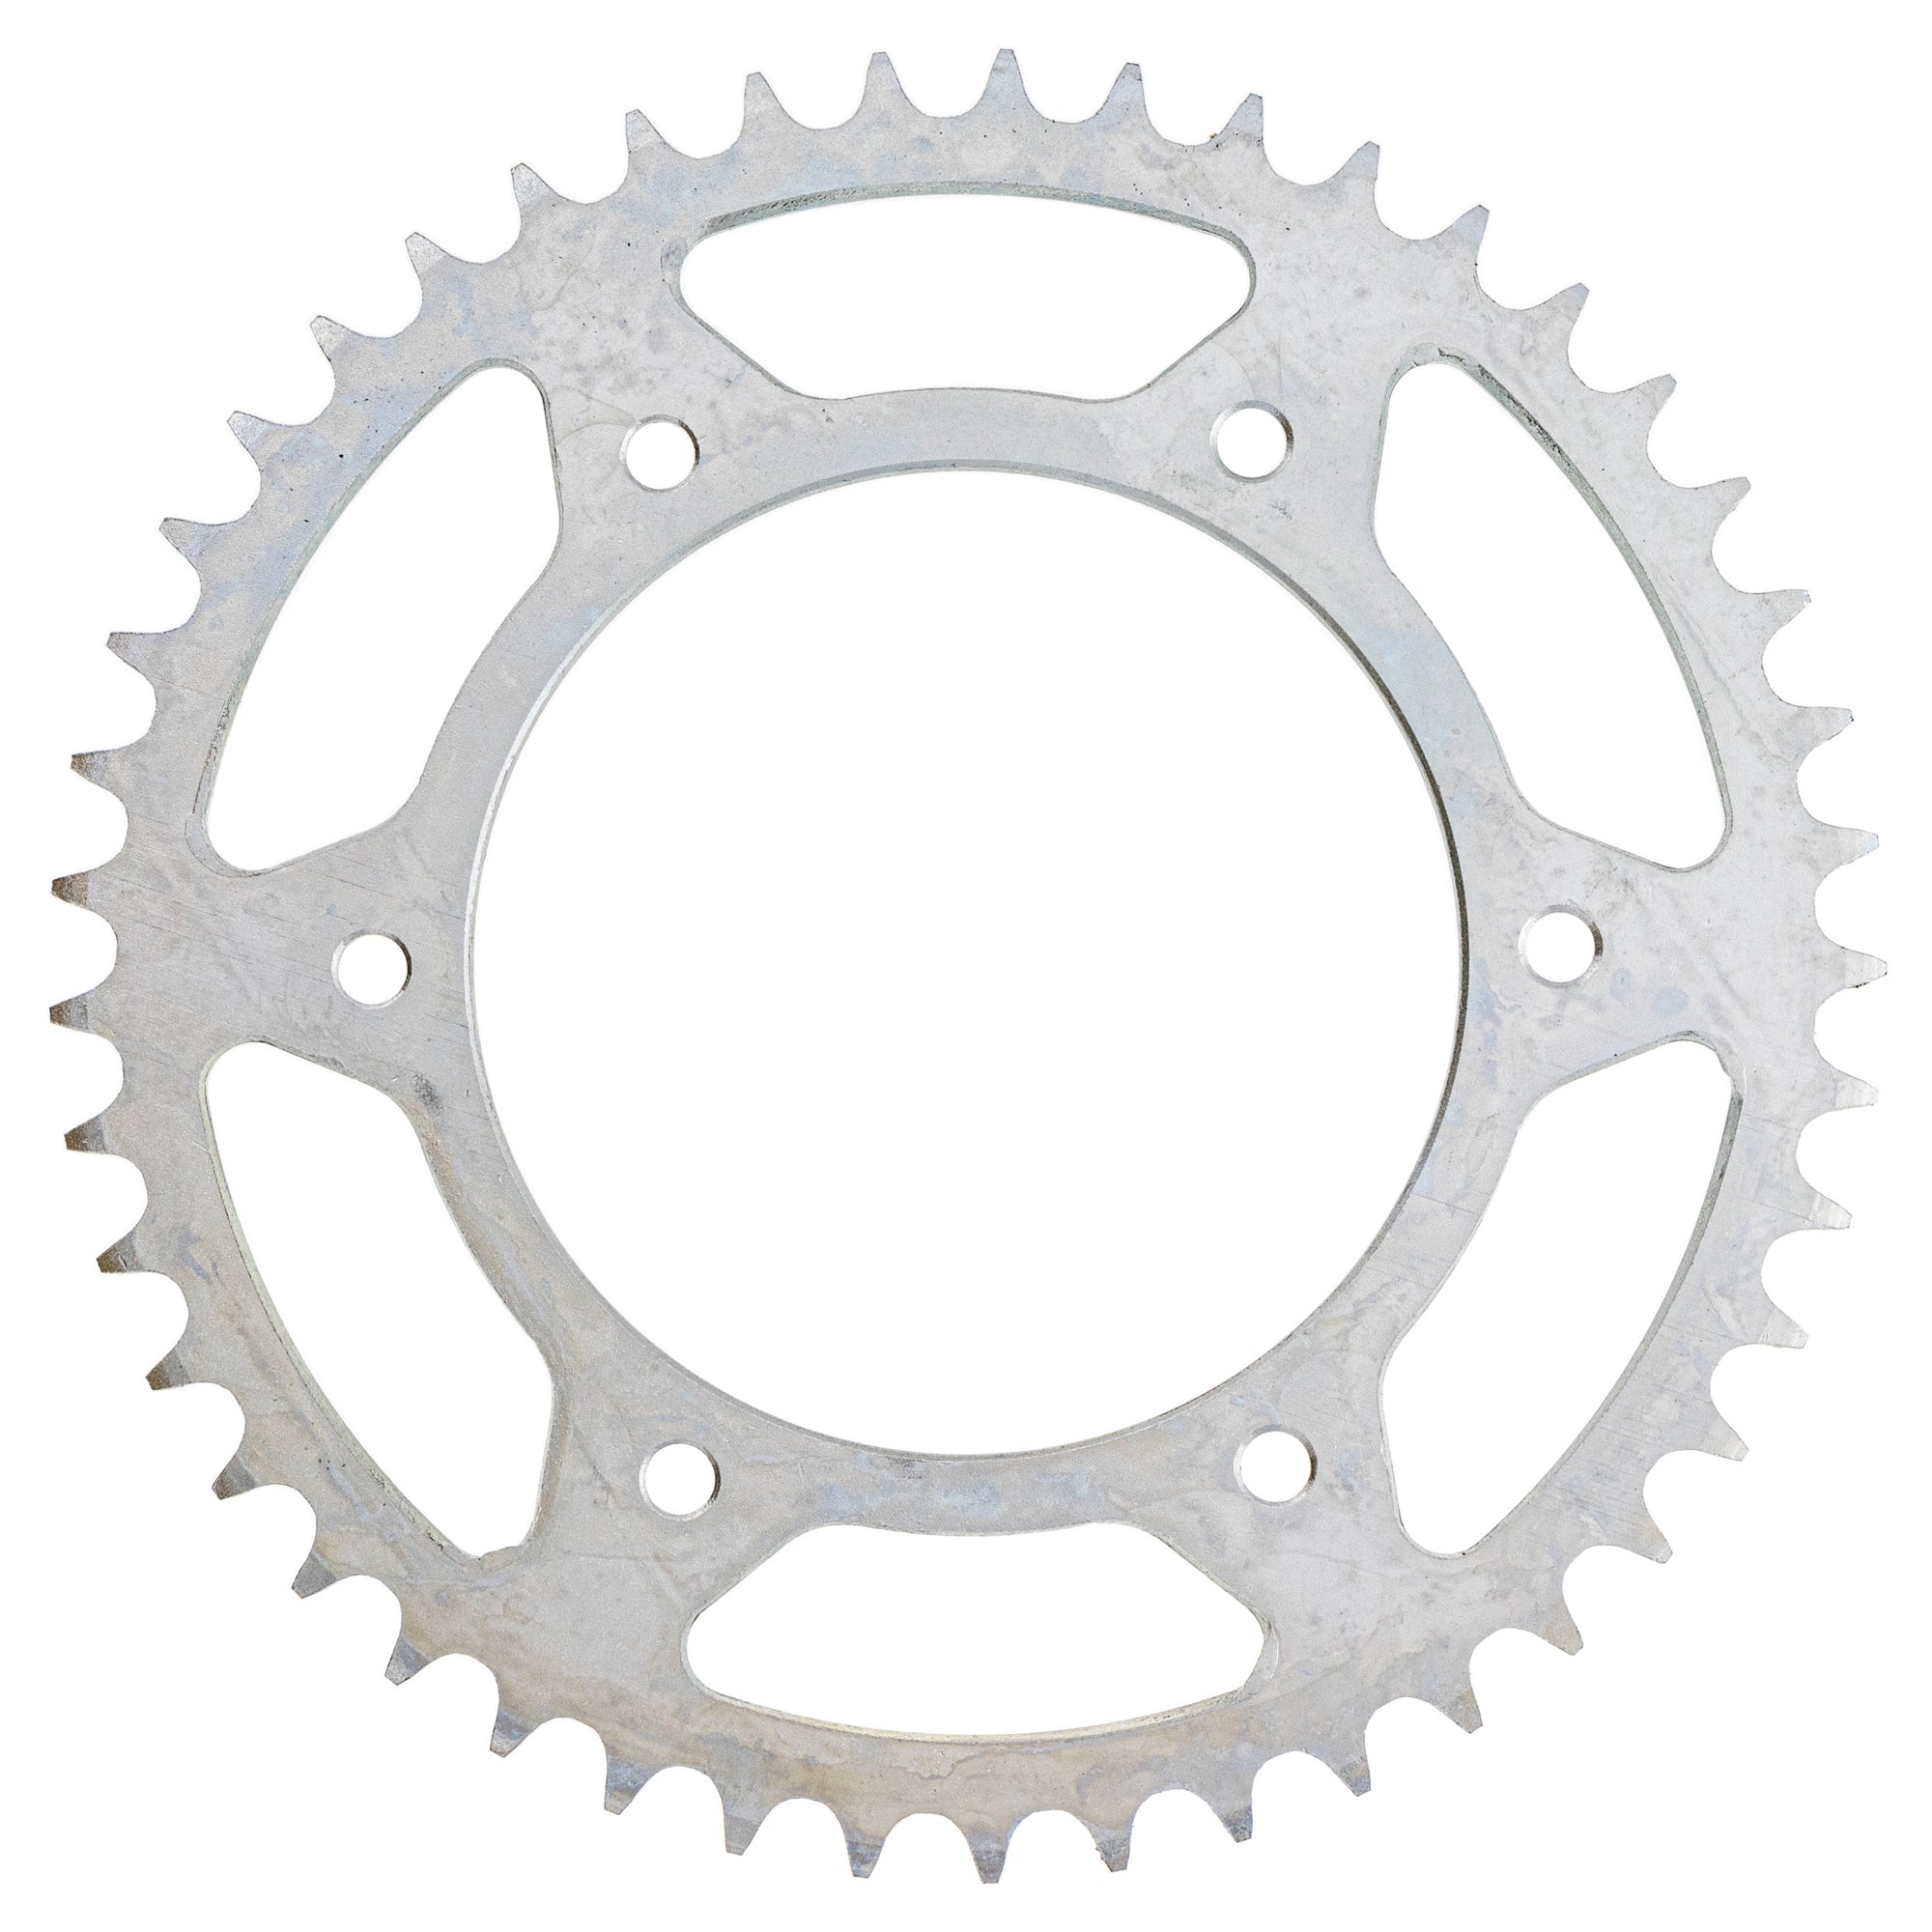 520 Pitch Front 14T Rear 45T Drive Sprocket Kit for KTM 350 400 640